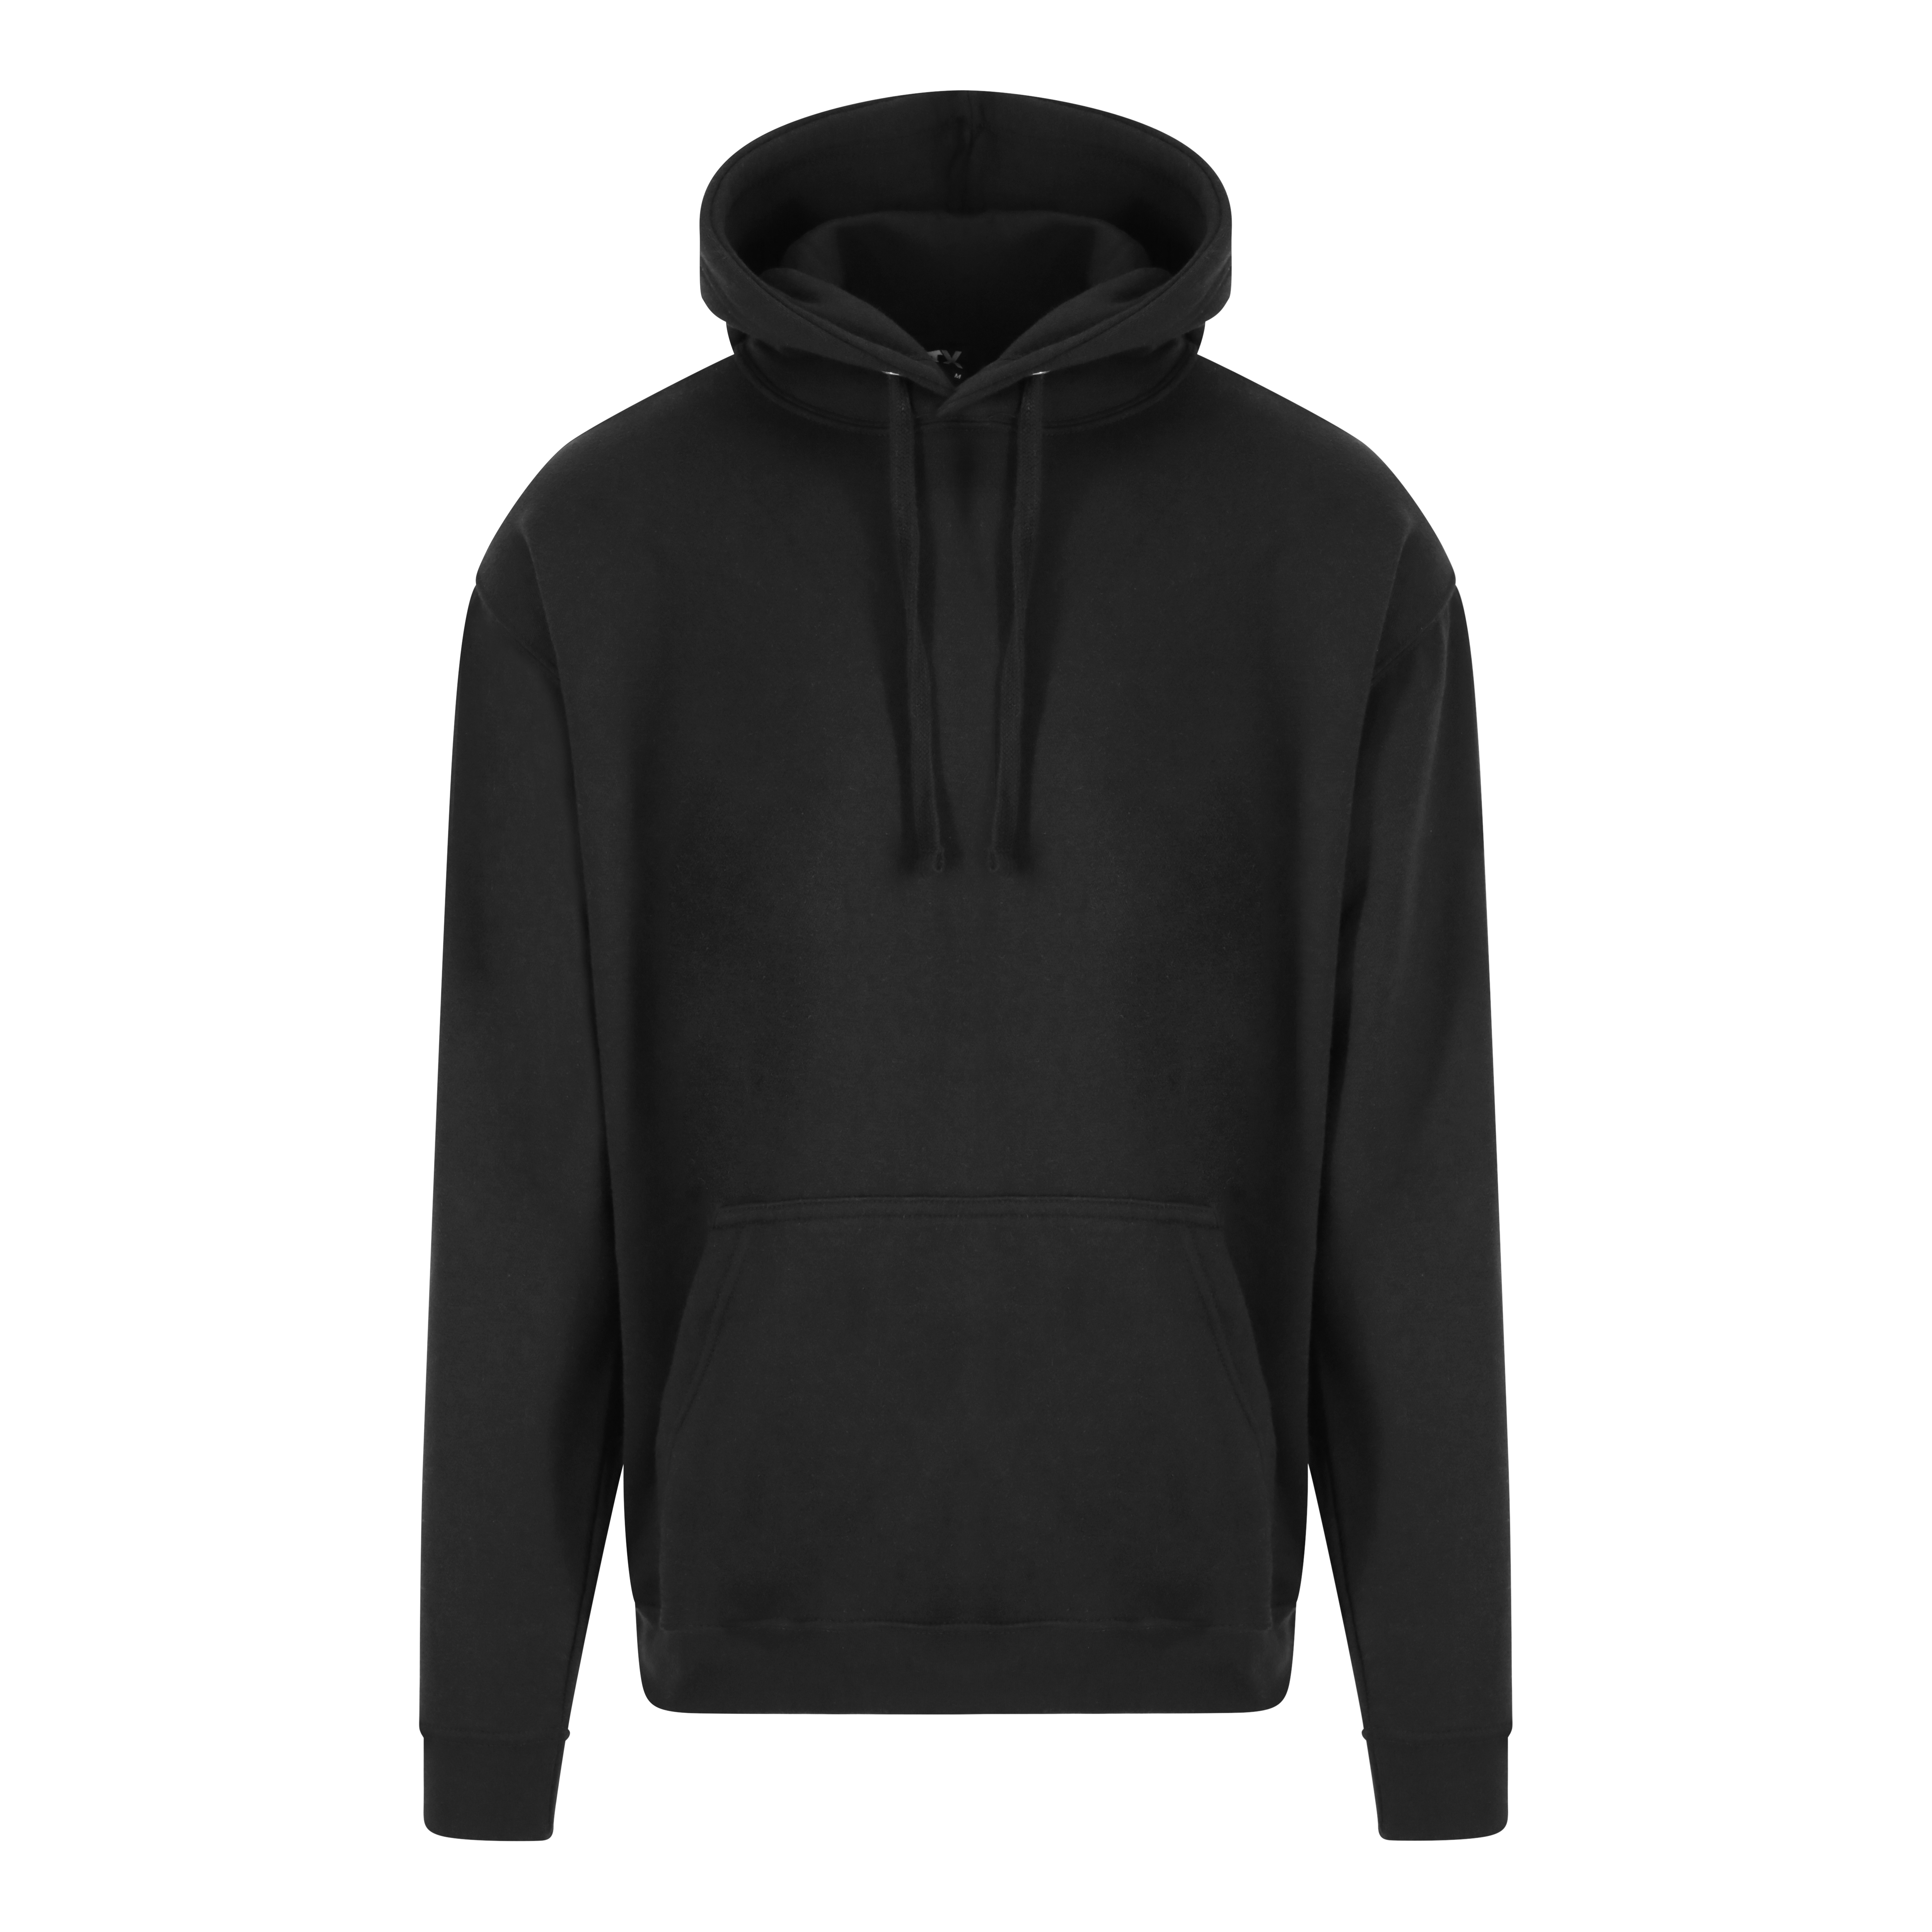 ax-httpswebsystems.s3.amazonaws.comtmp_for_downloadpro-rtx-pro-hoodie-black.jpg